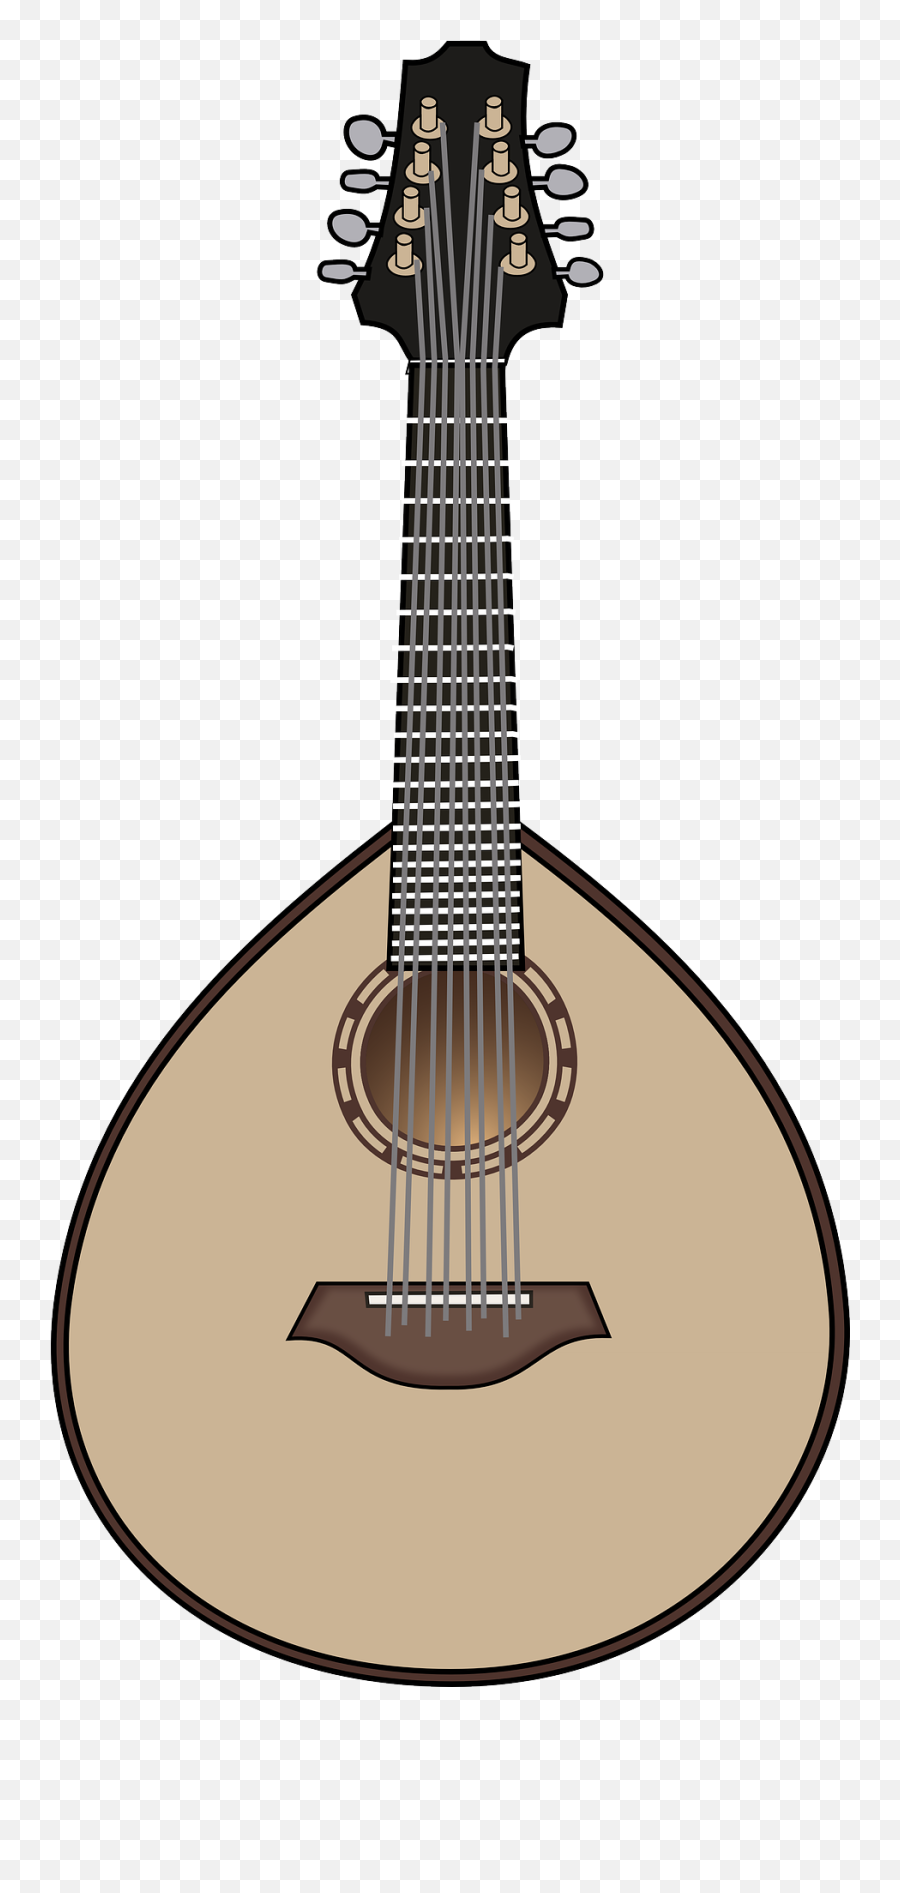 Lute Music Instrument Drawing Free Image Download - Lute Clip Art Emoji,How To Draw Emotions Tumblr